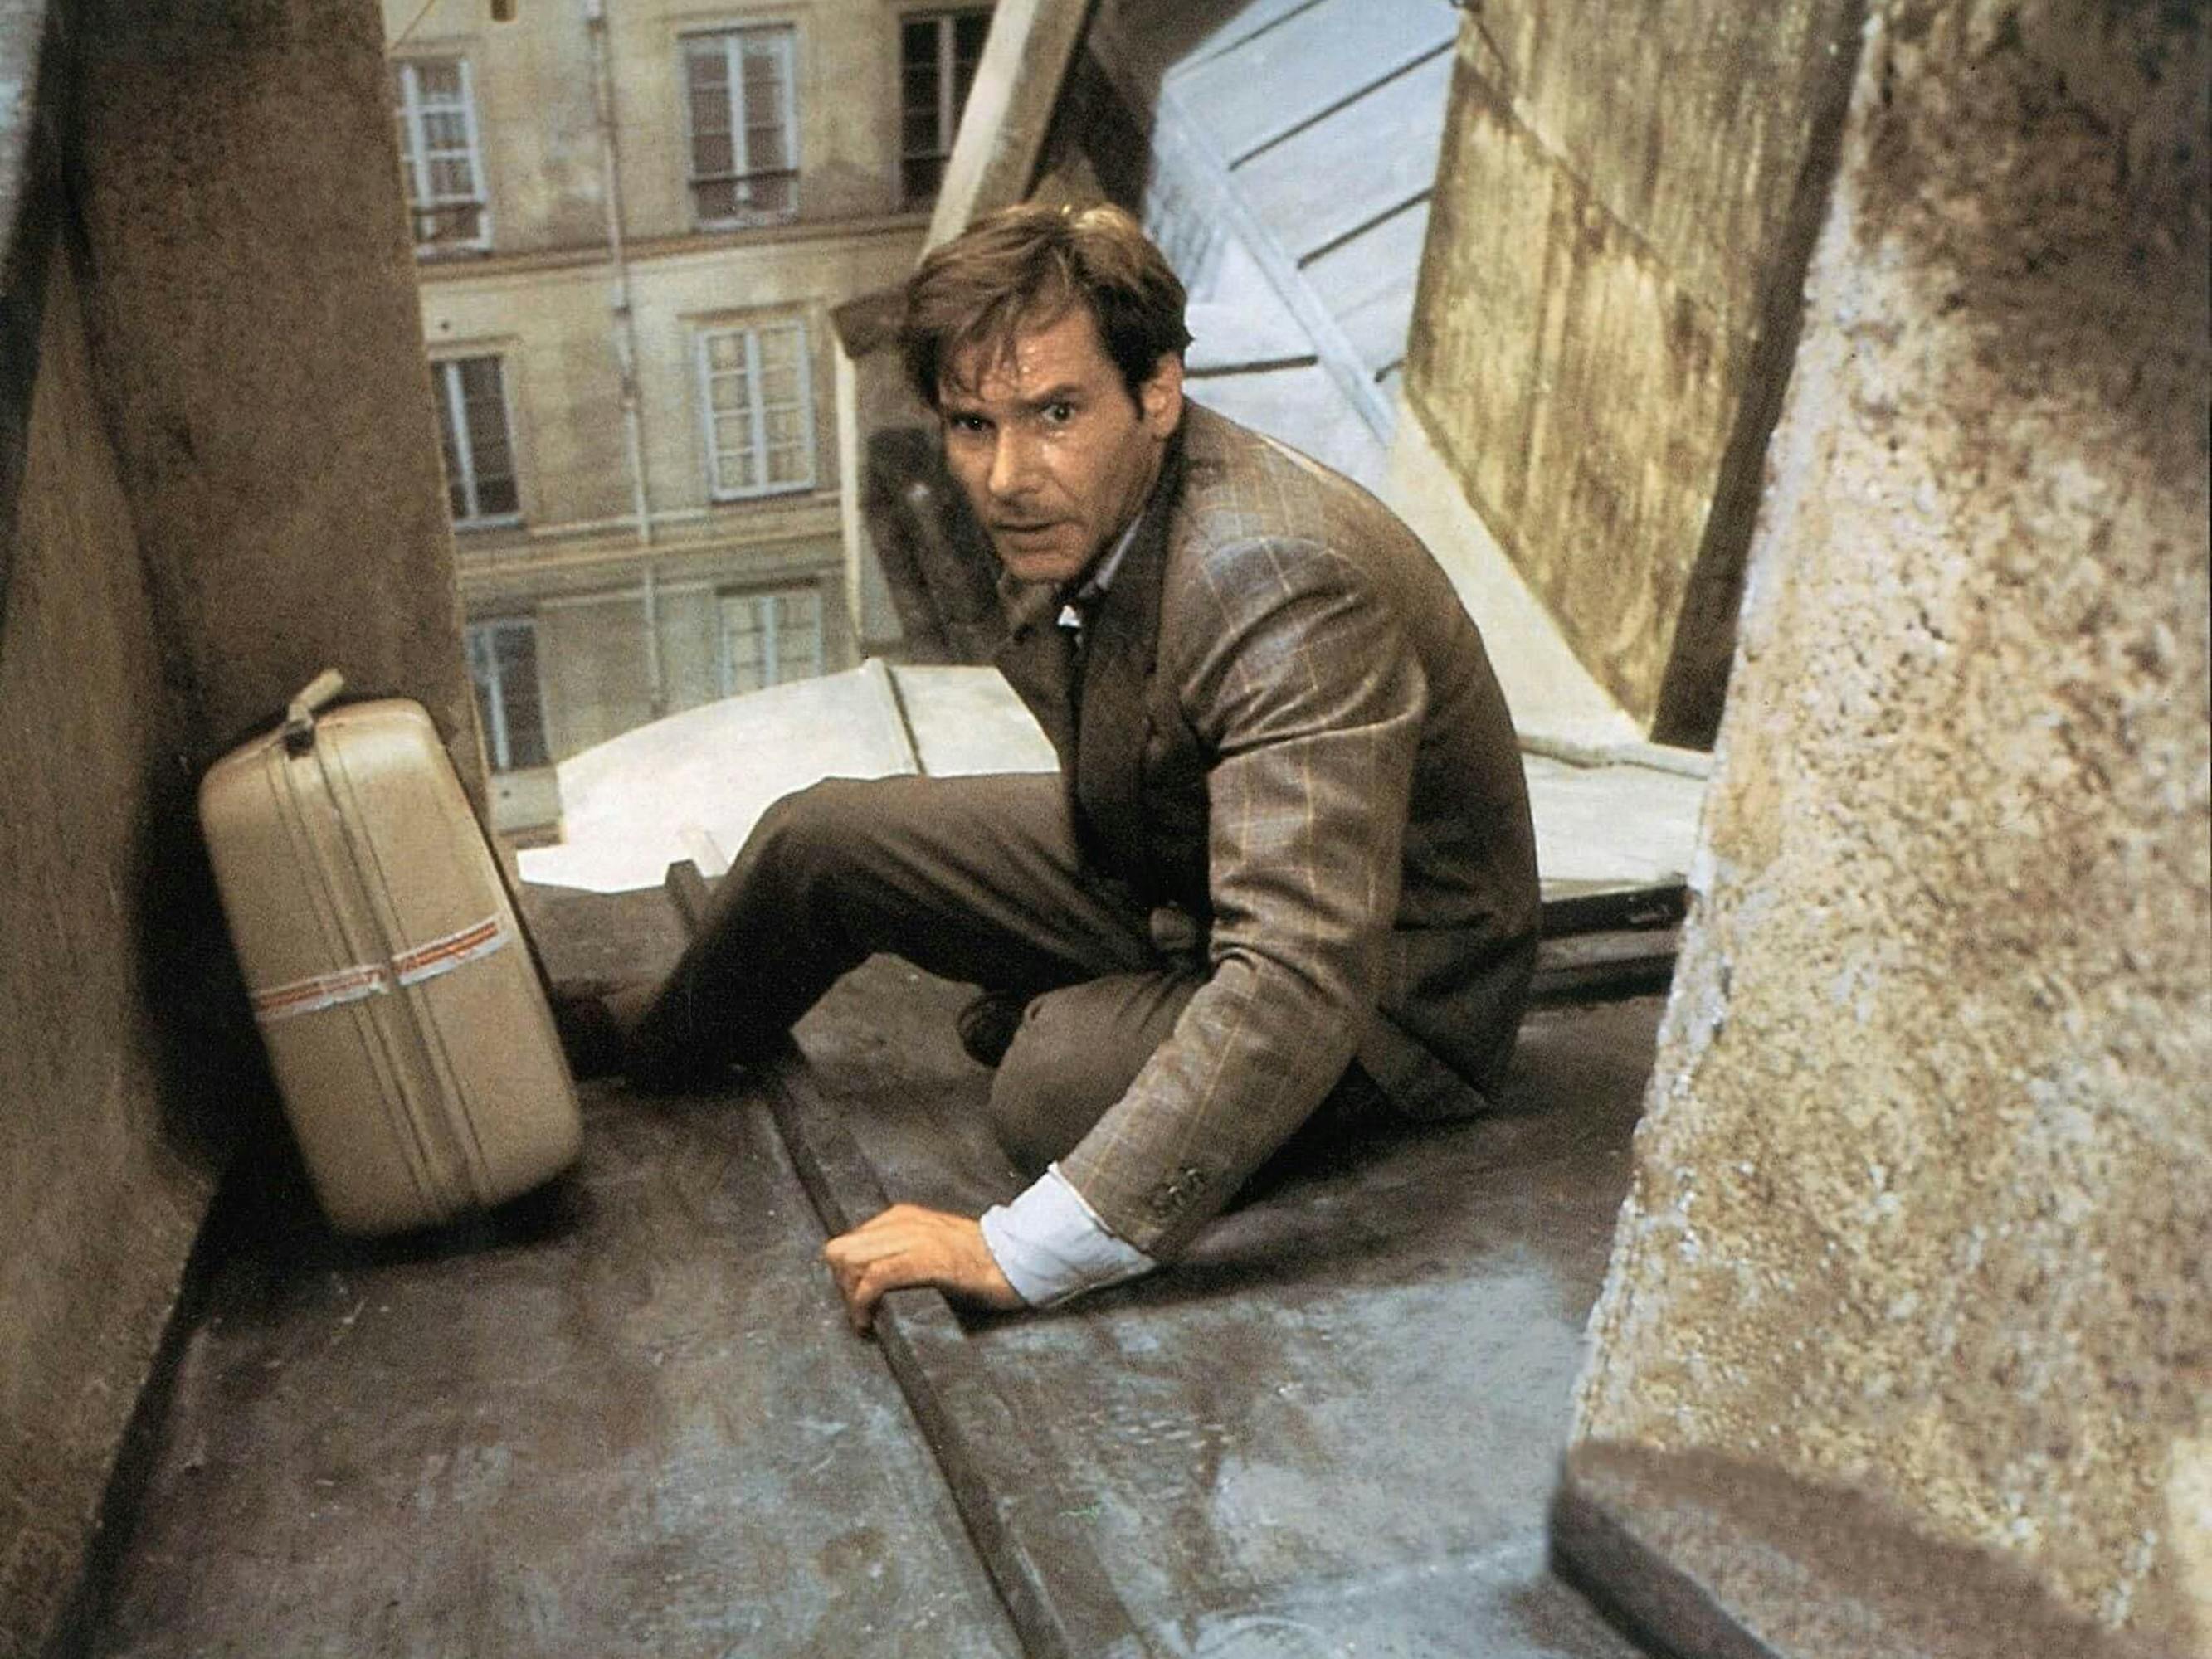 Dr. Richard Walker (Harrison Ford) in Frantic. He wears a brown suit and scales a roof with a briefcase.